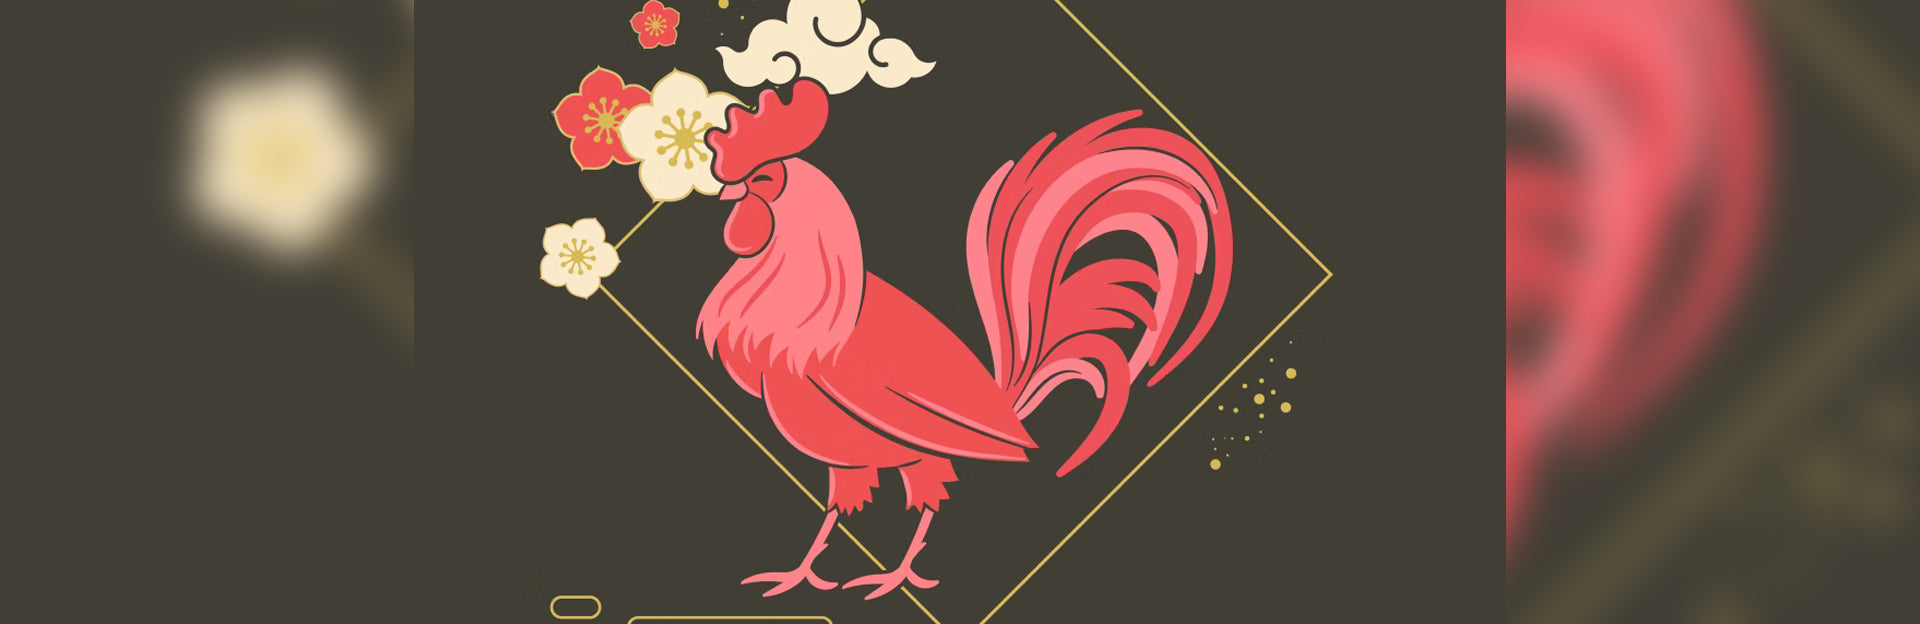 chinese zodiac signs rooster